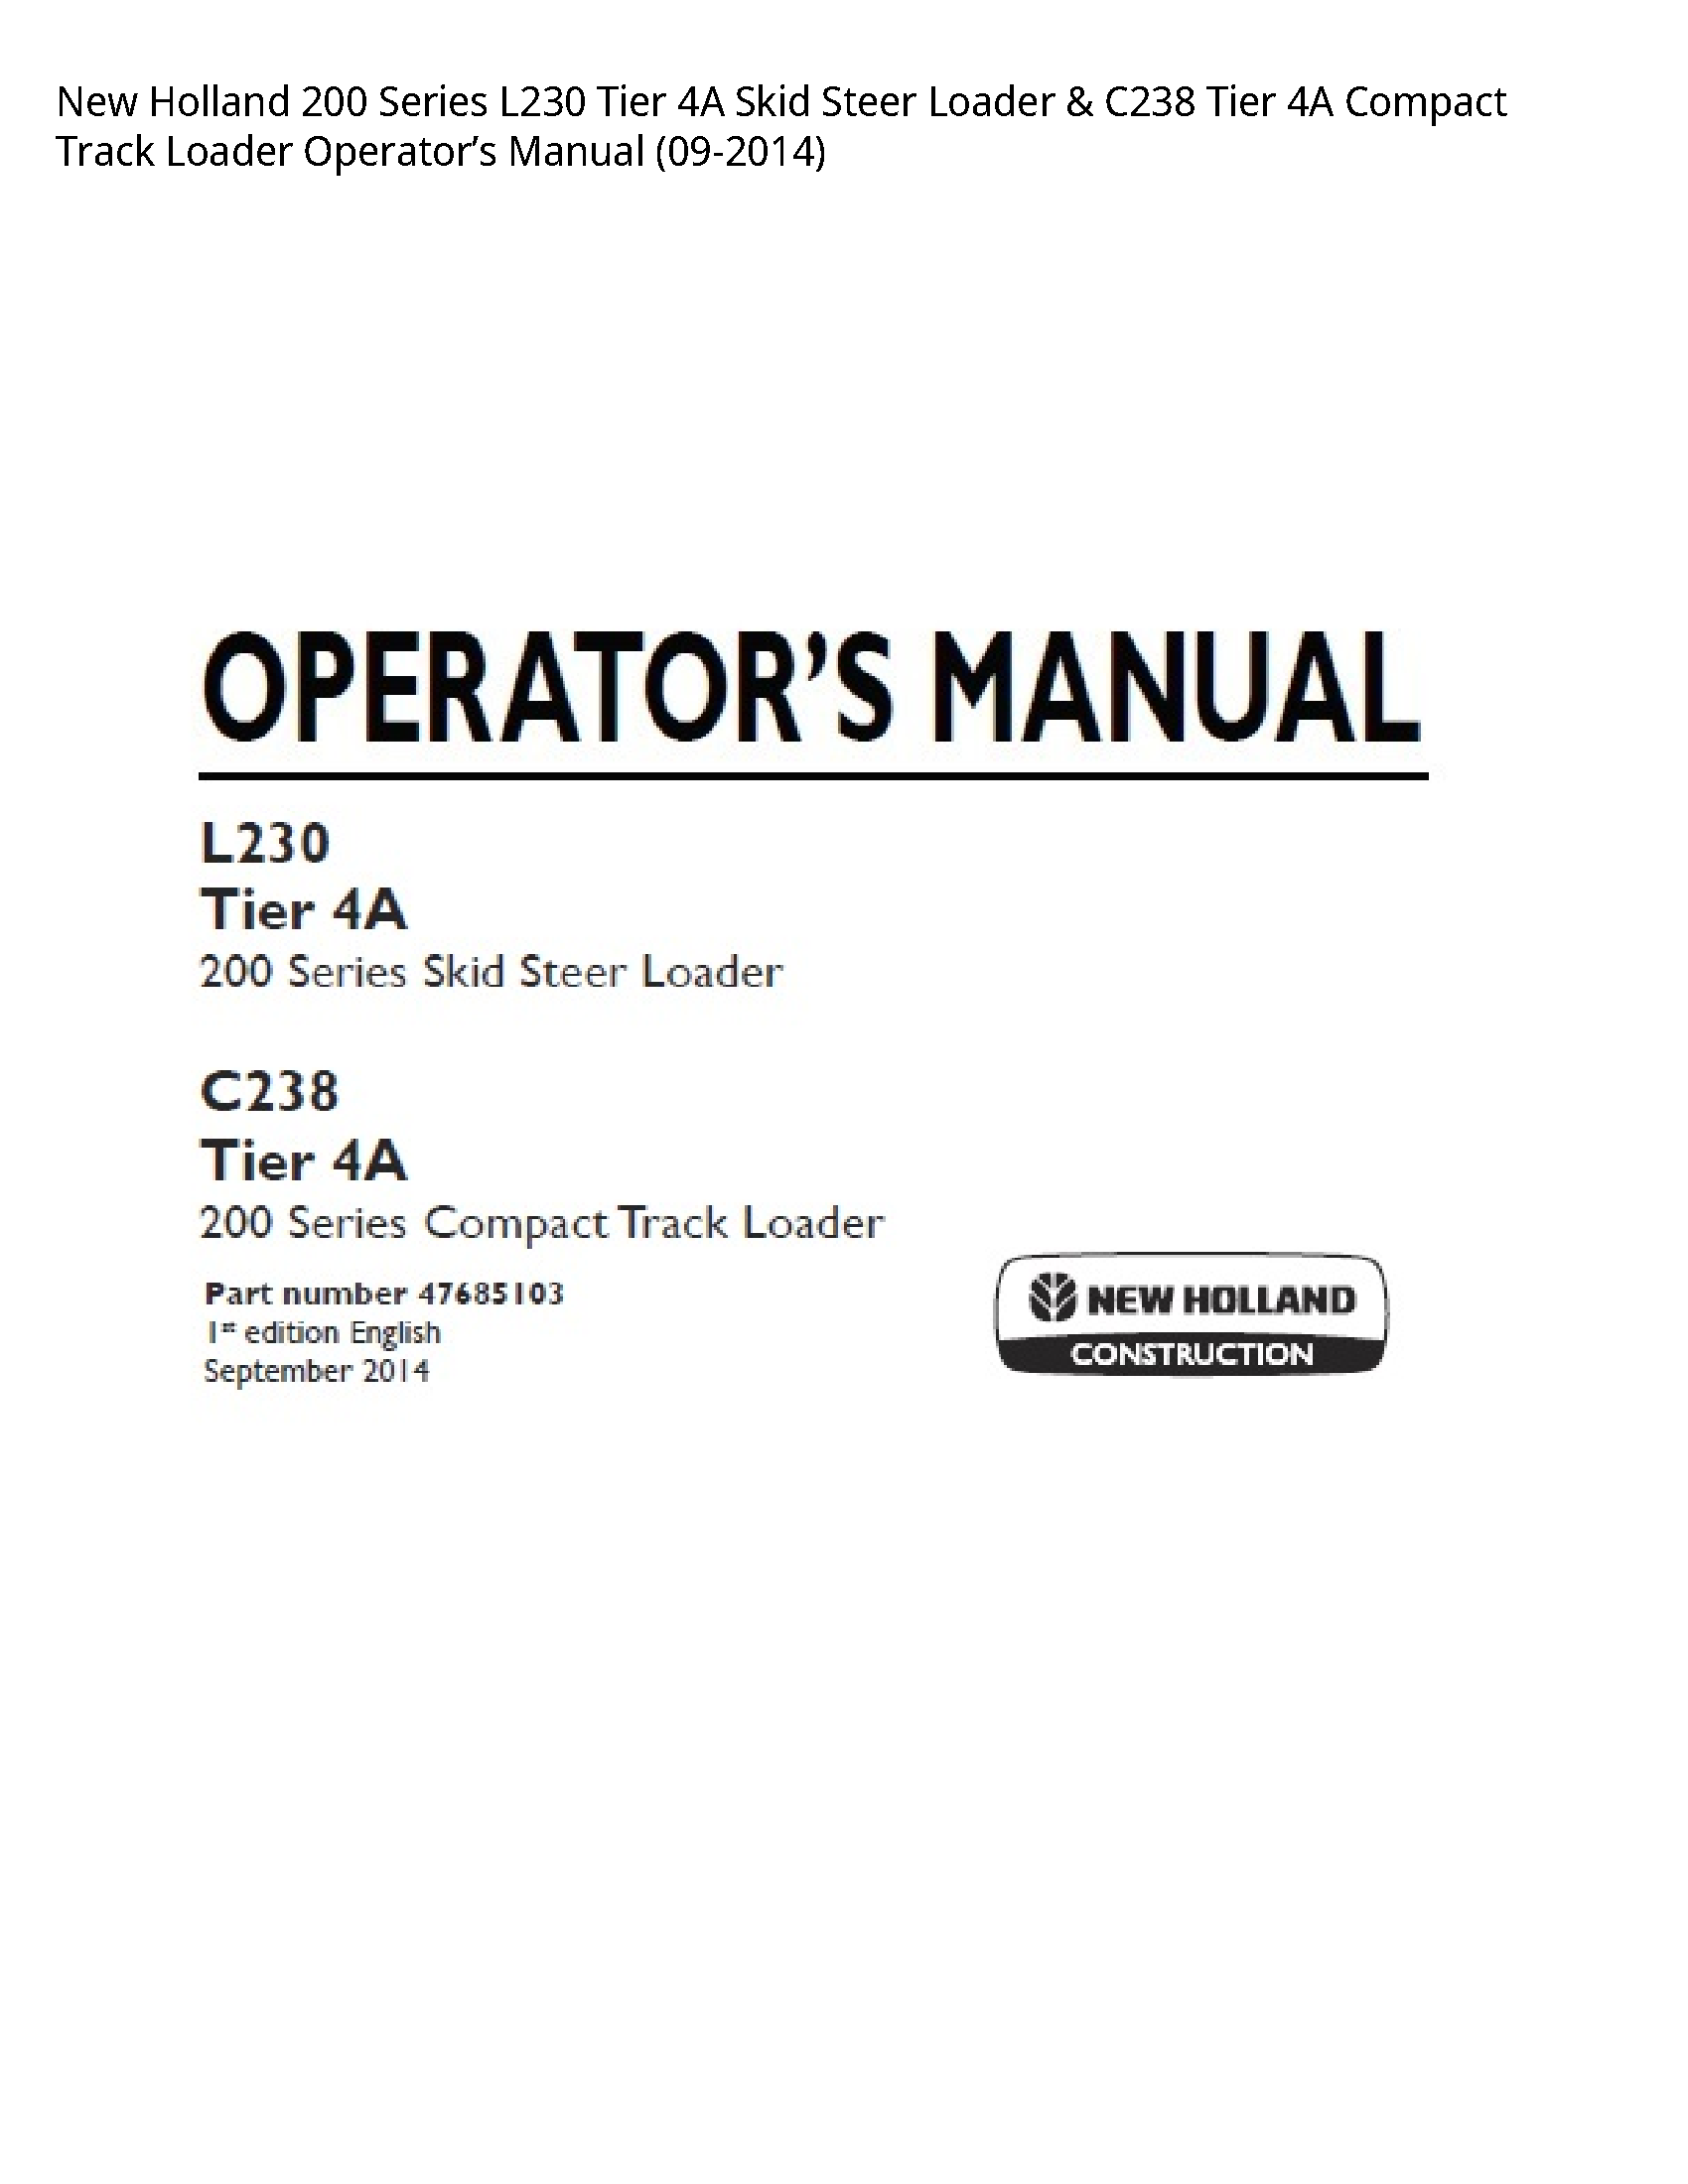 New Holland 200 Series Tier Skid Steer Loader Tier Compact Track Loader Operator’s manual